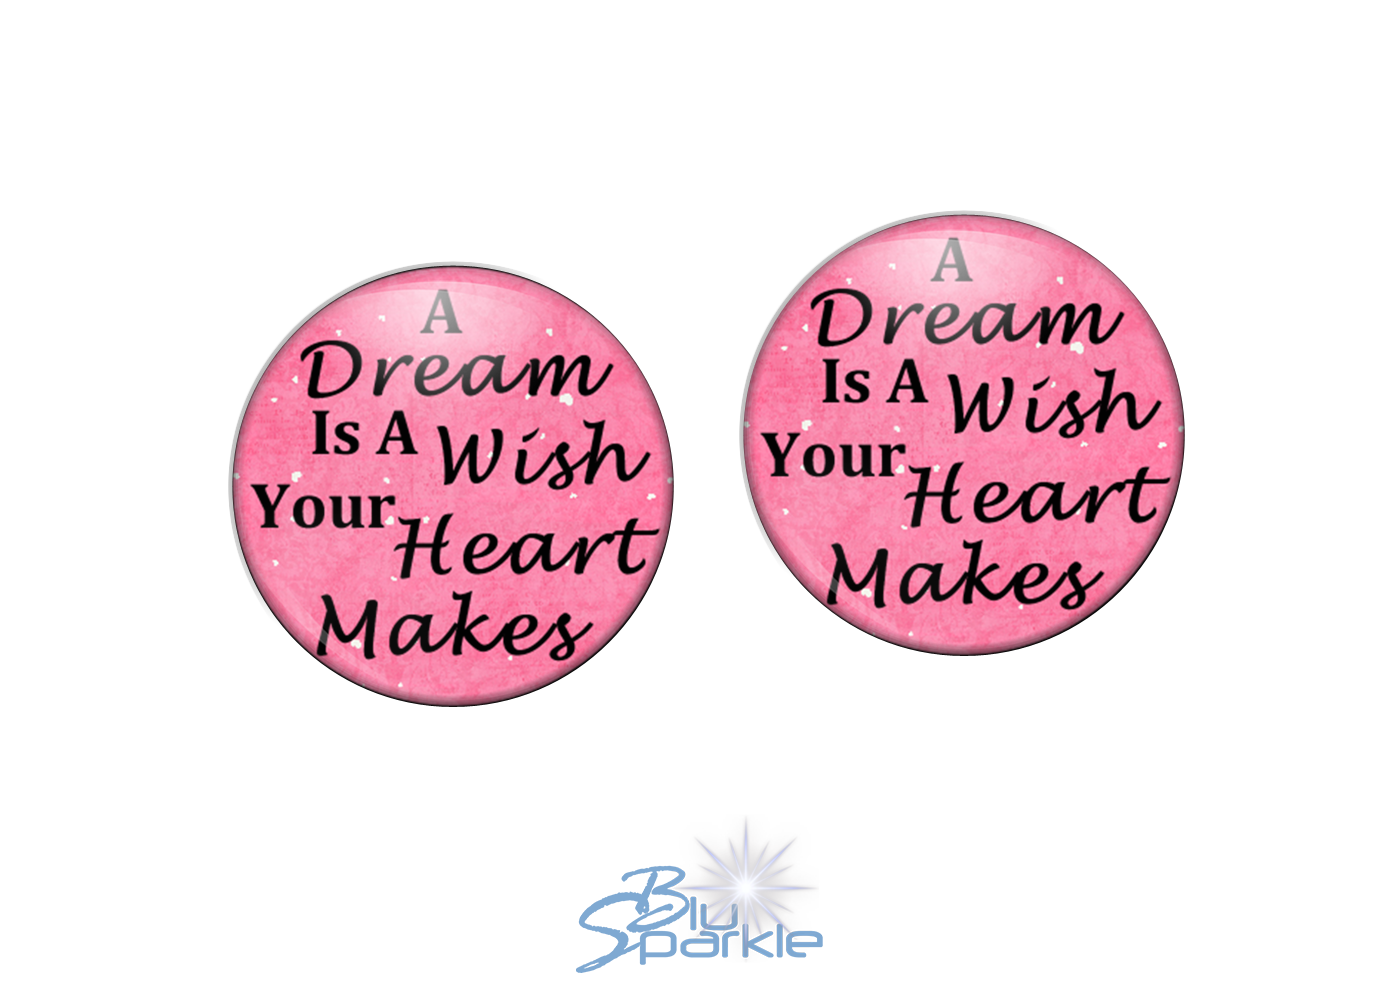 A Dream Is A Wish Your Heart Makes - Earrings